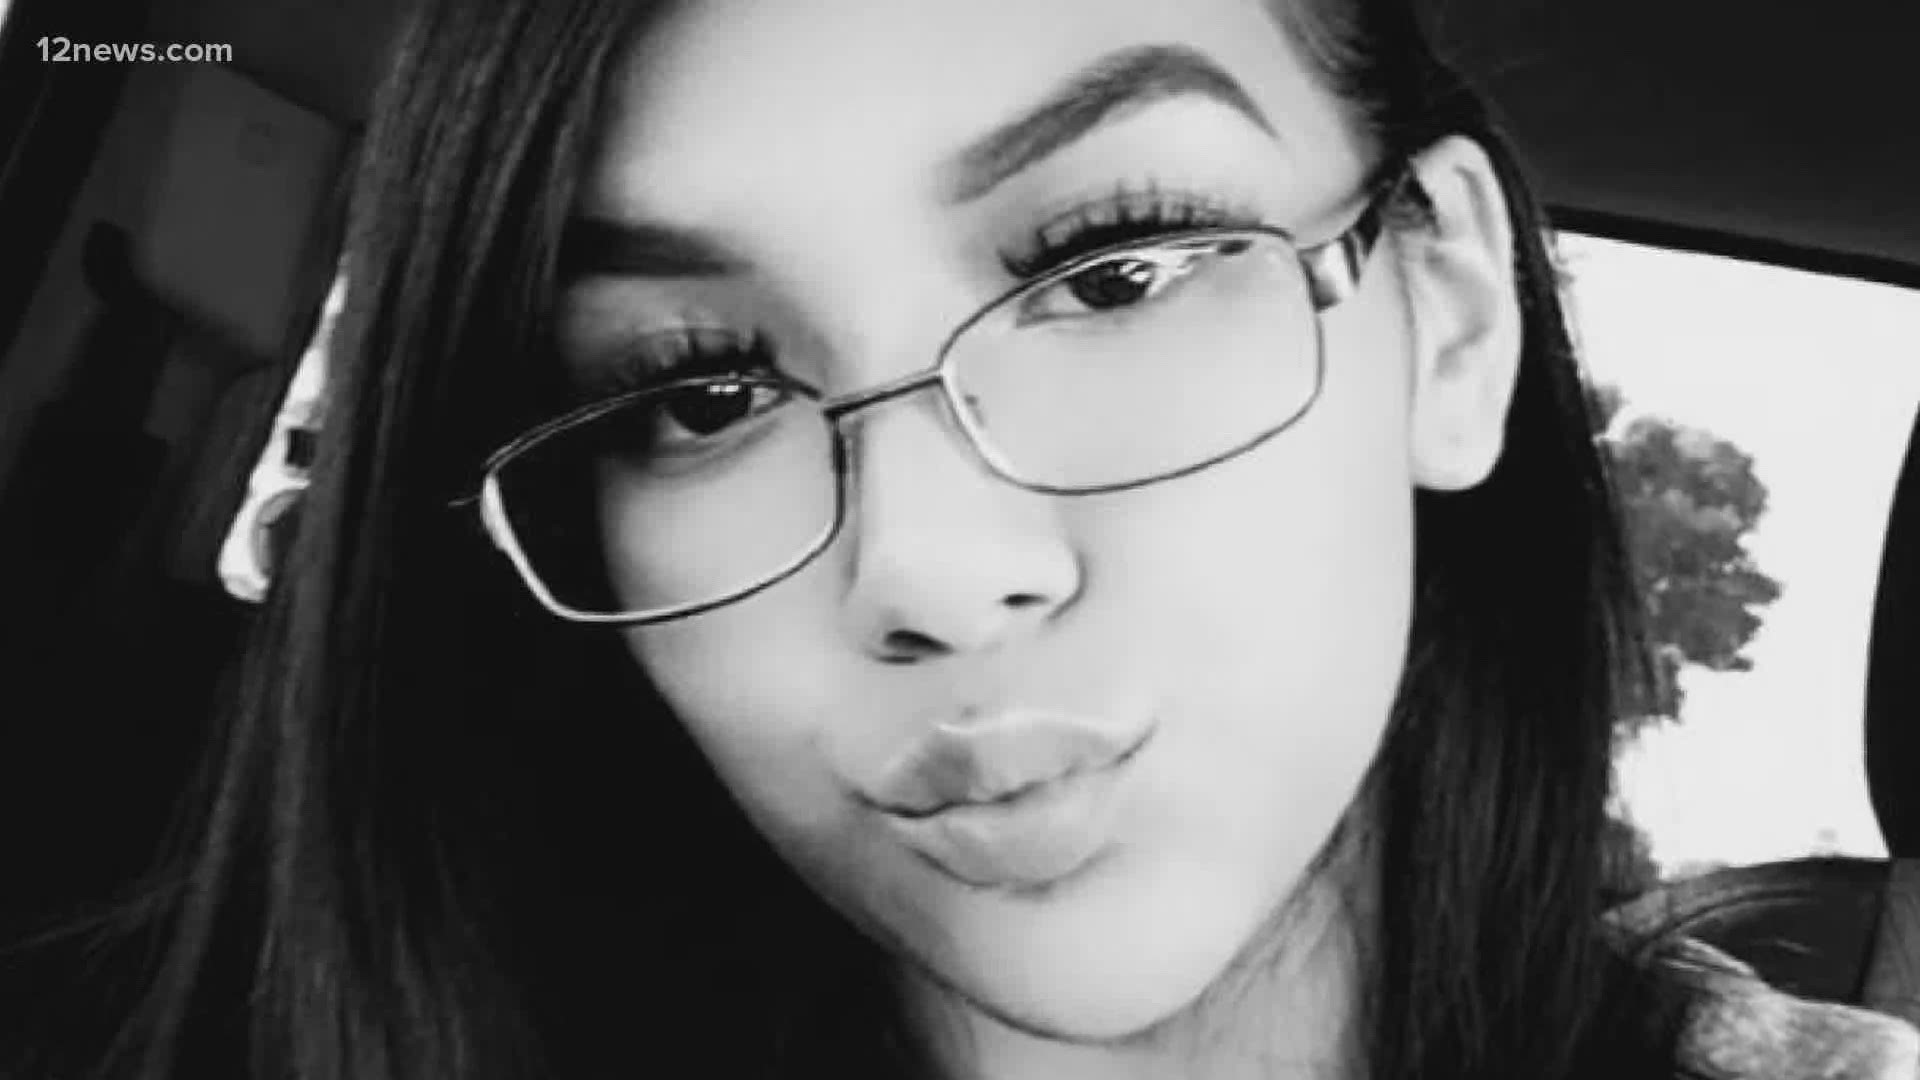 16-year-old Destiny is one of the people police say was shot by gunman Armando Junior Hernandez at Westgate. She is now in stable condition but may lose her leg.